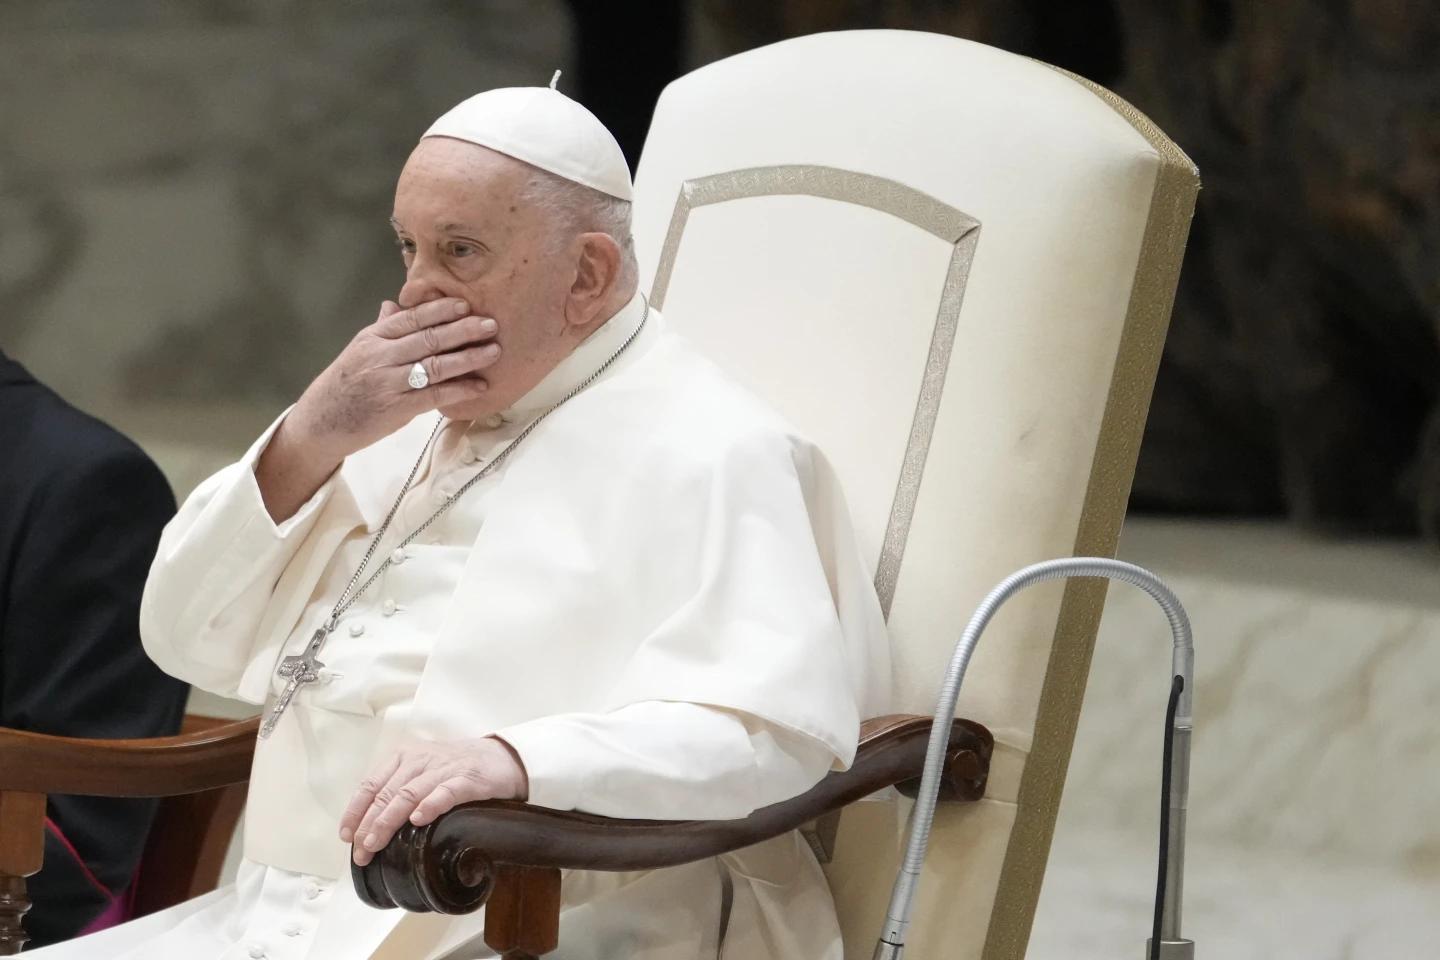 Pope Francis cancels audiences due to ‘mild flu’